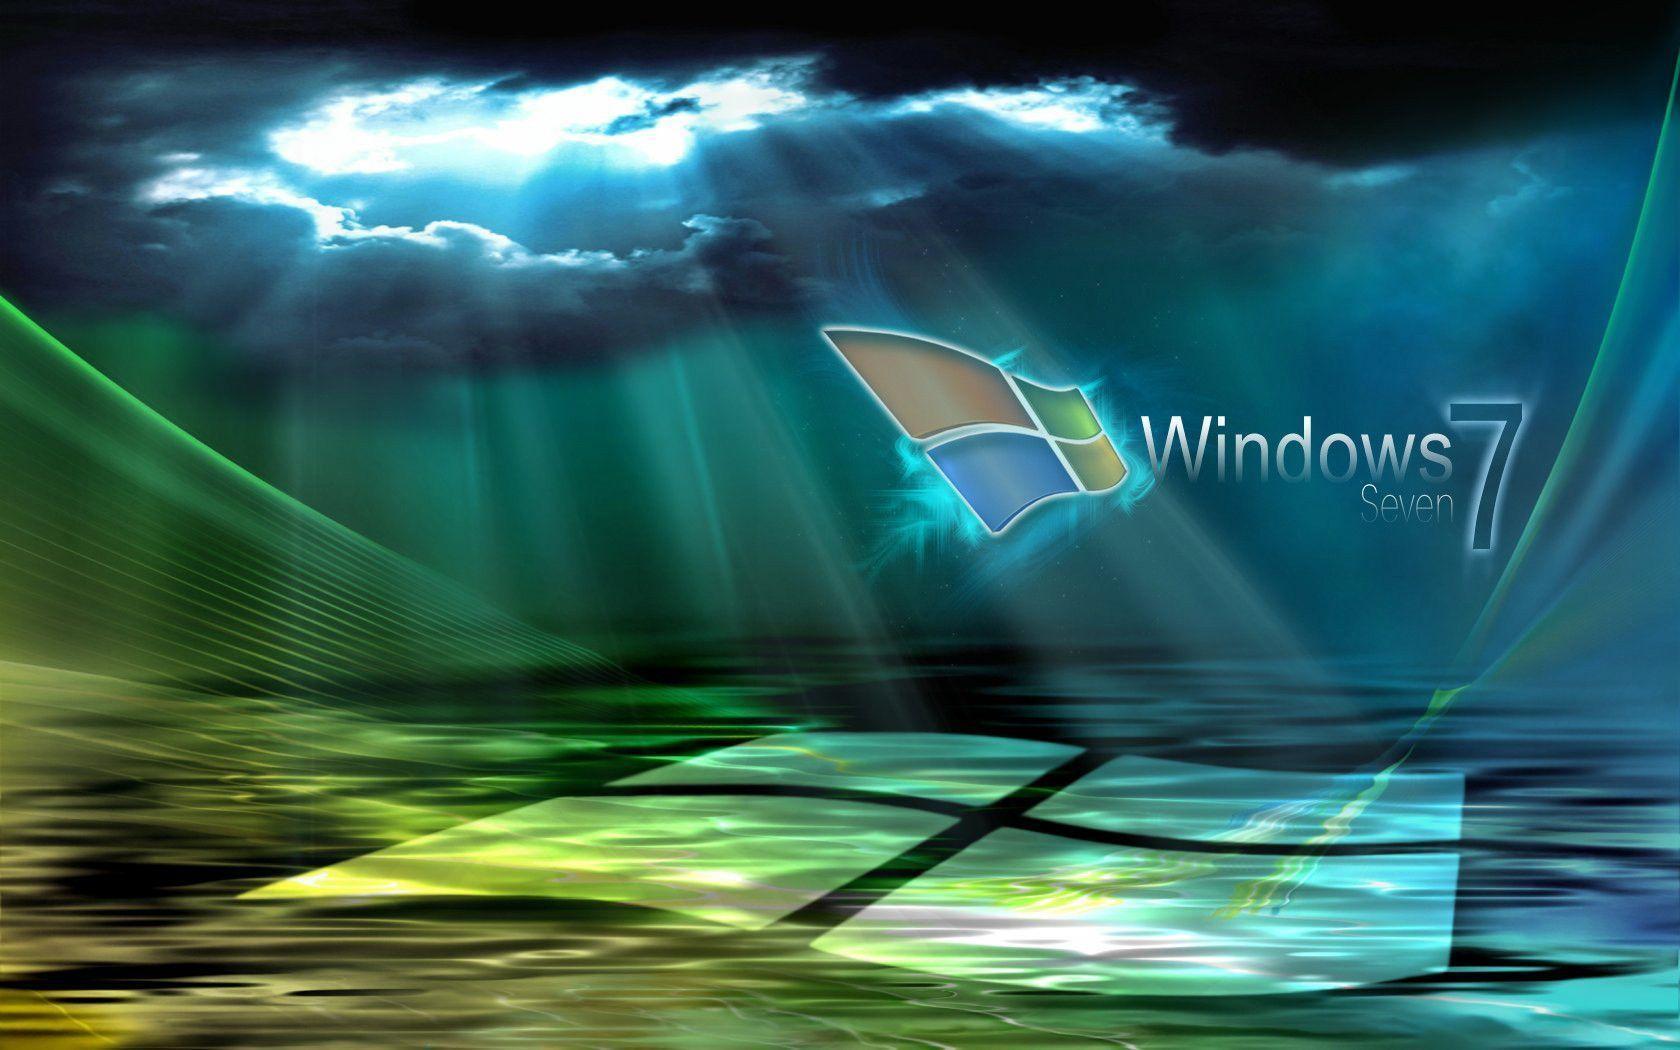 Wallpaper For > Awesome Windows 7 Wallpaper